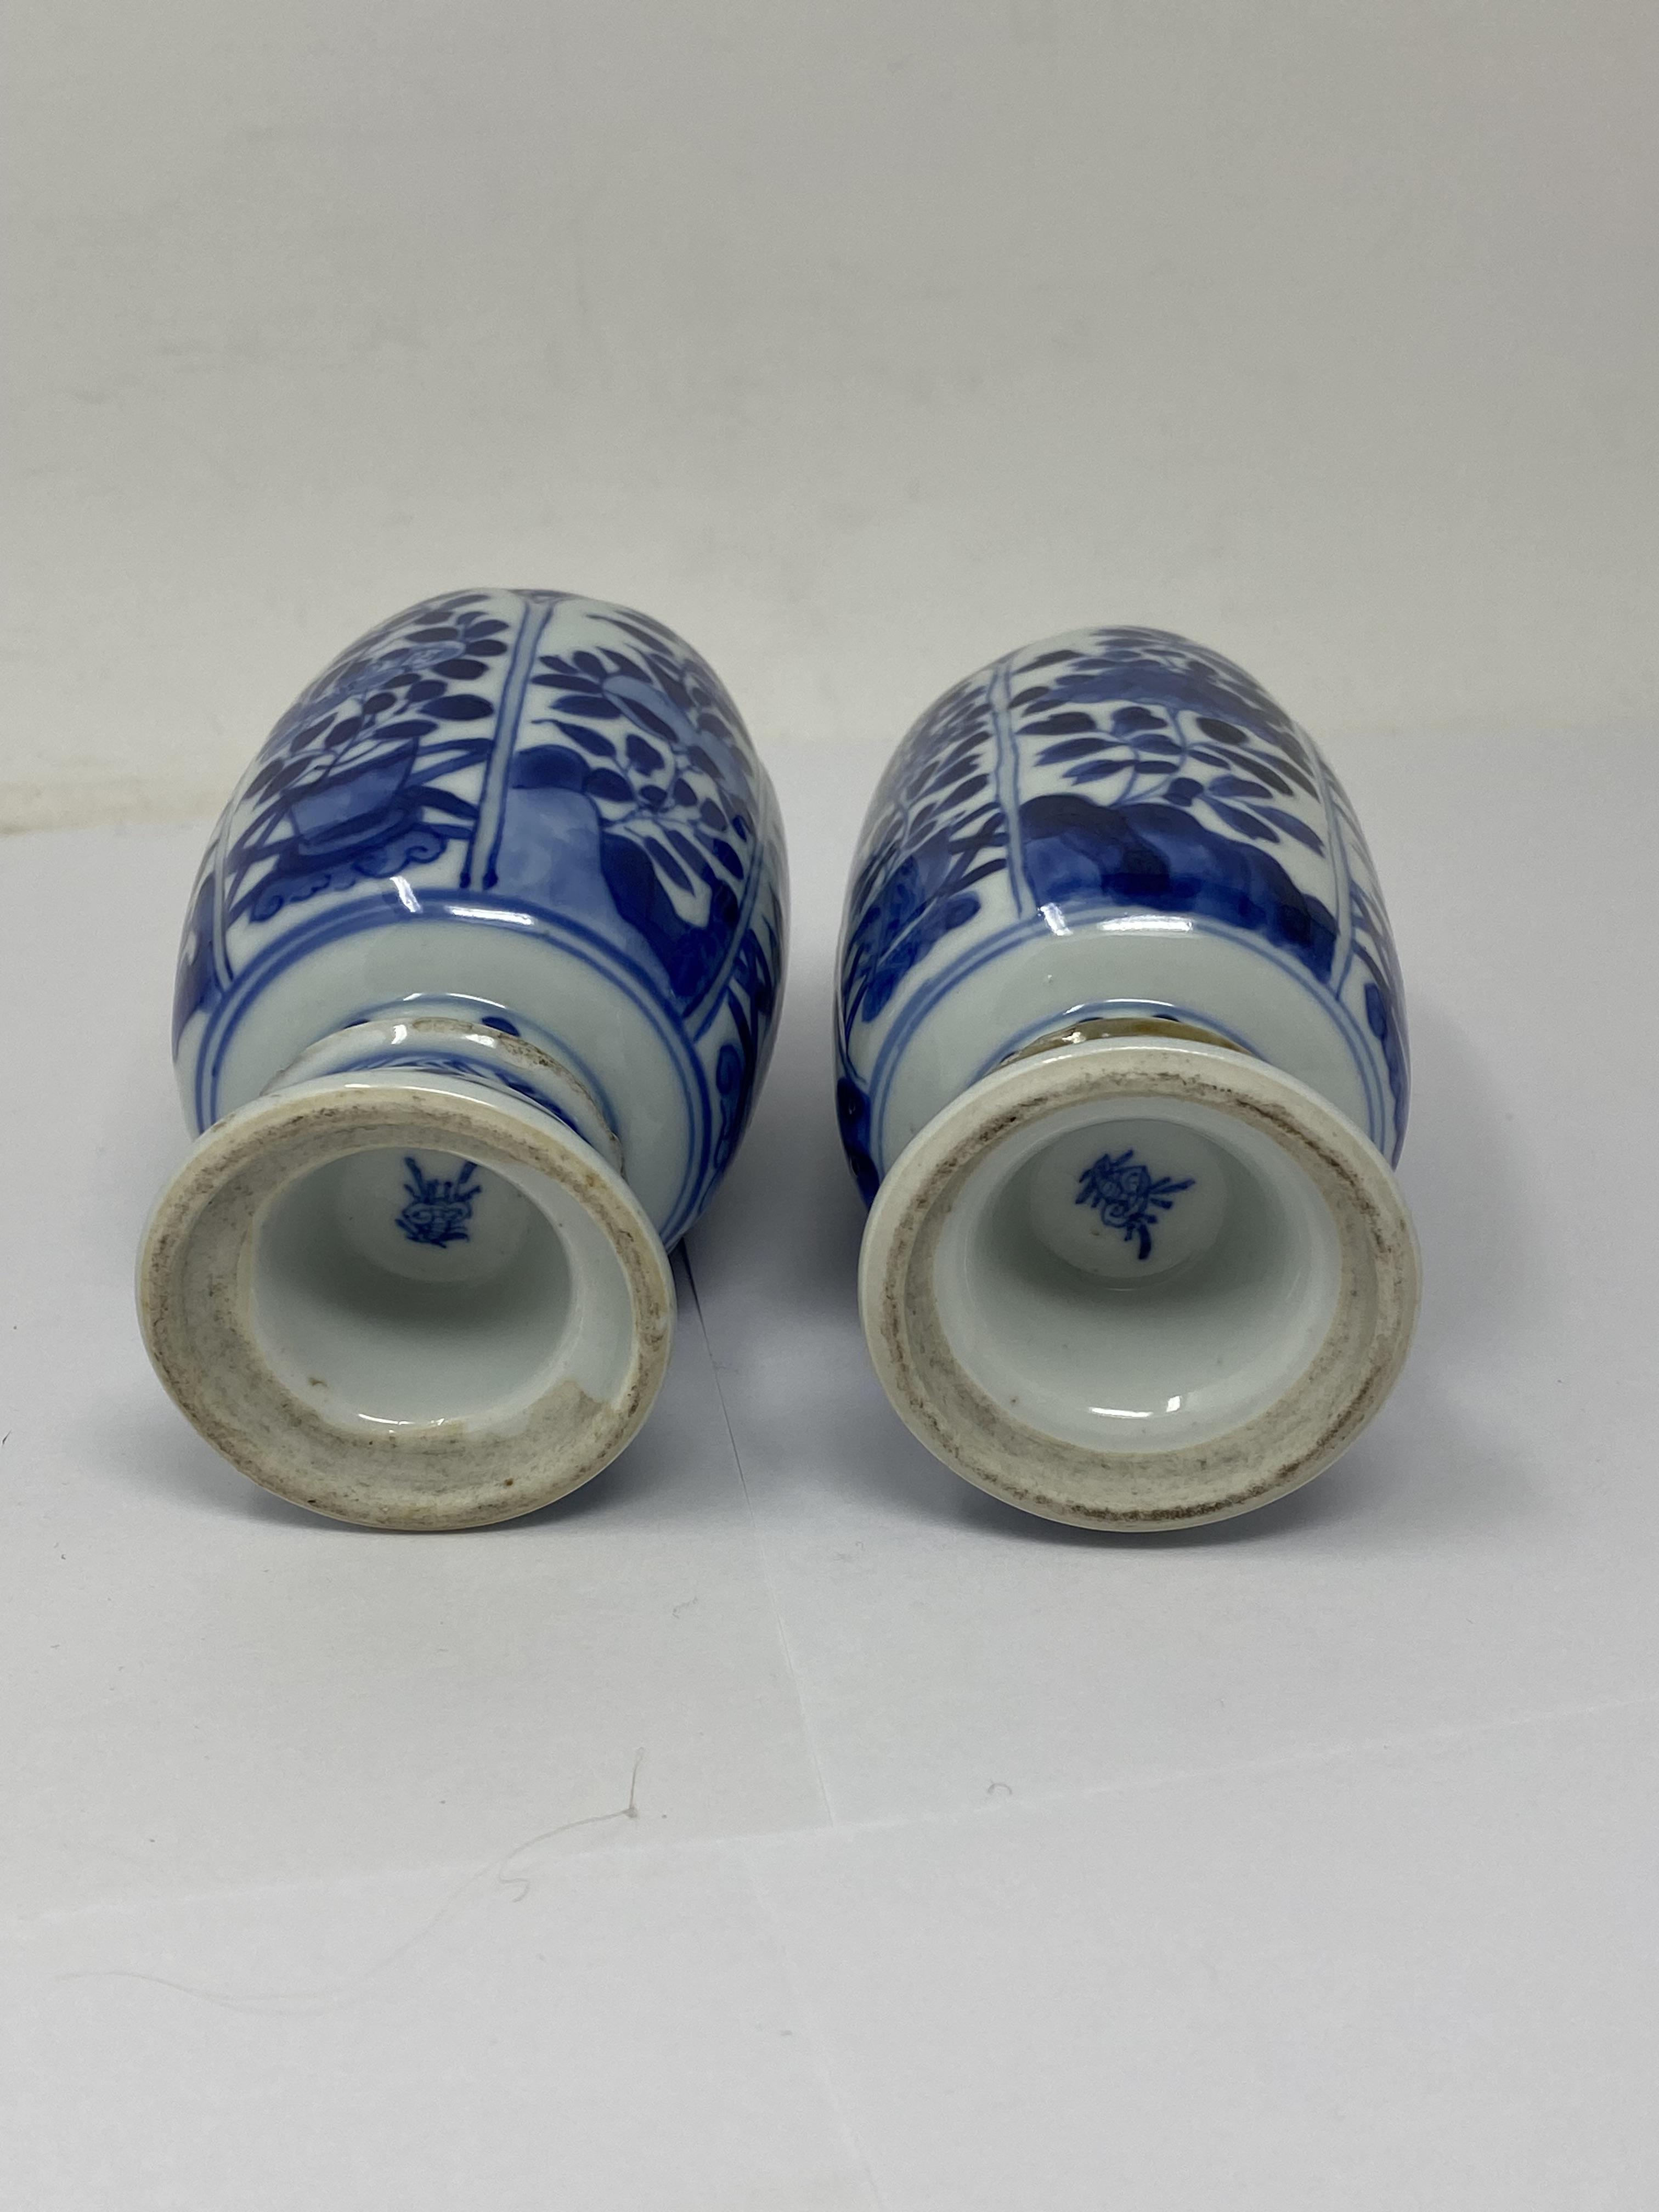 A PAIR OF CHINESE BLUE AND WHITE SMALL VASES, KANGXI PERIOD (1662-1722) - Image 4 of 5